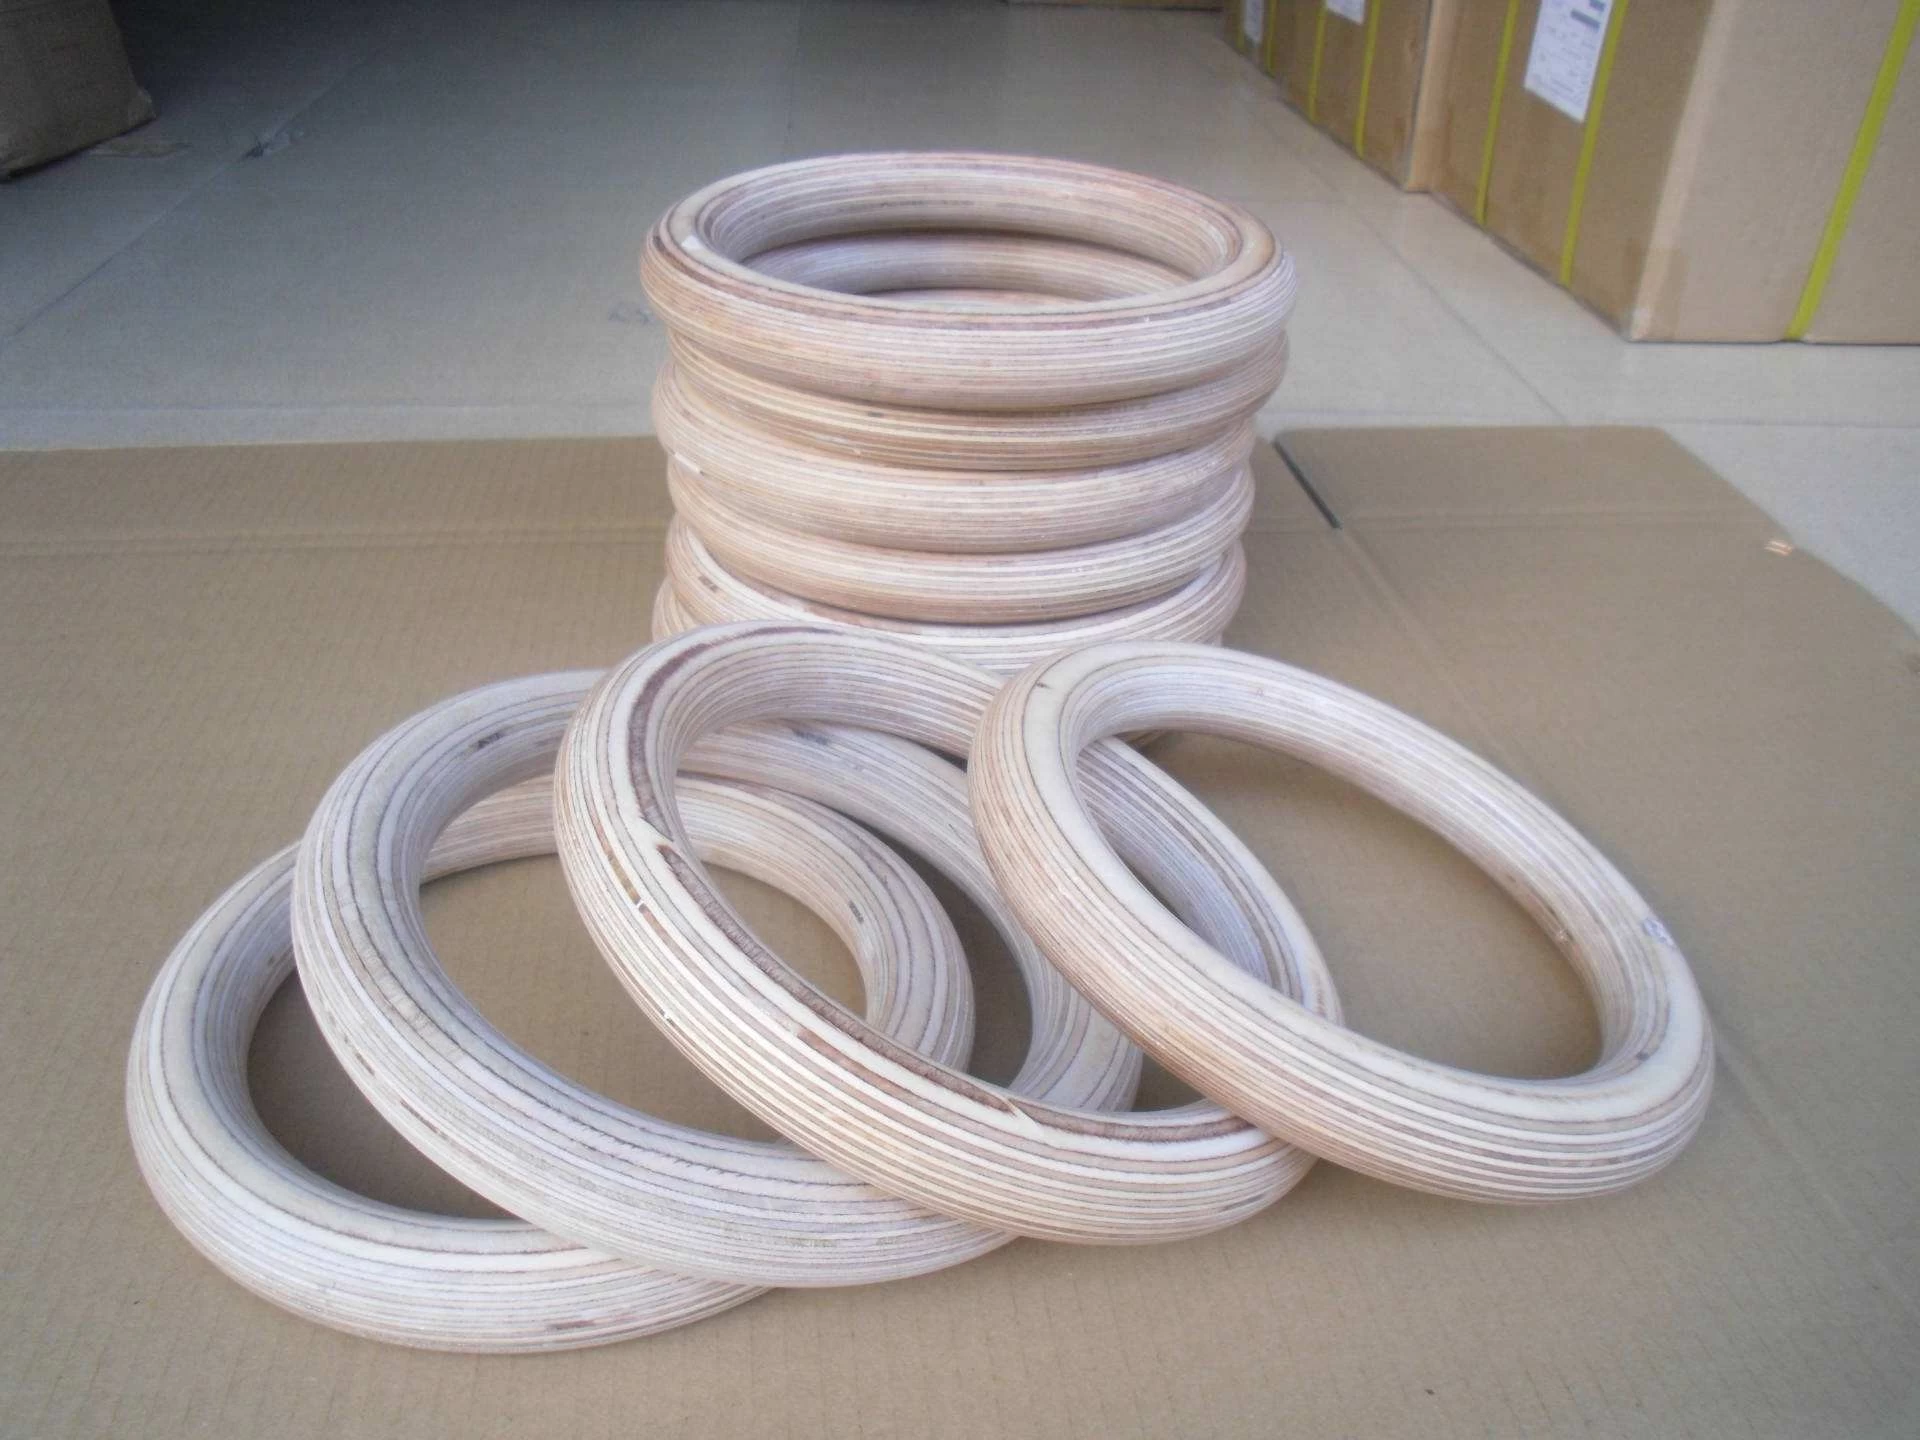 High Quality Wood Gymnastic Ring For Gymnastic Exercise.